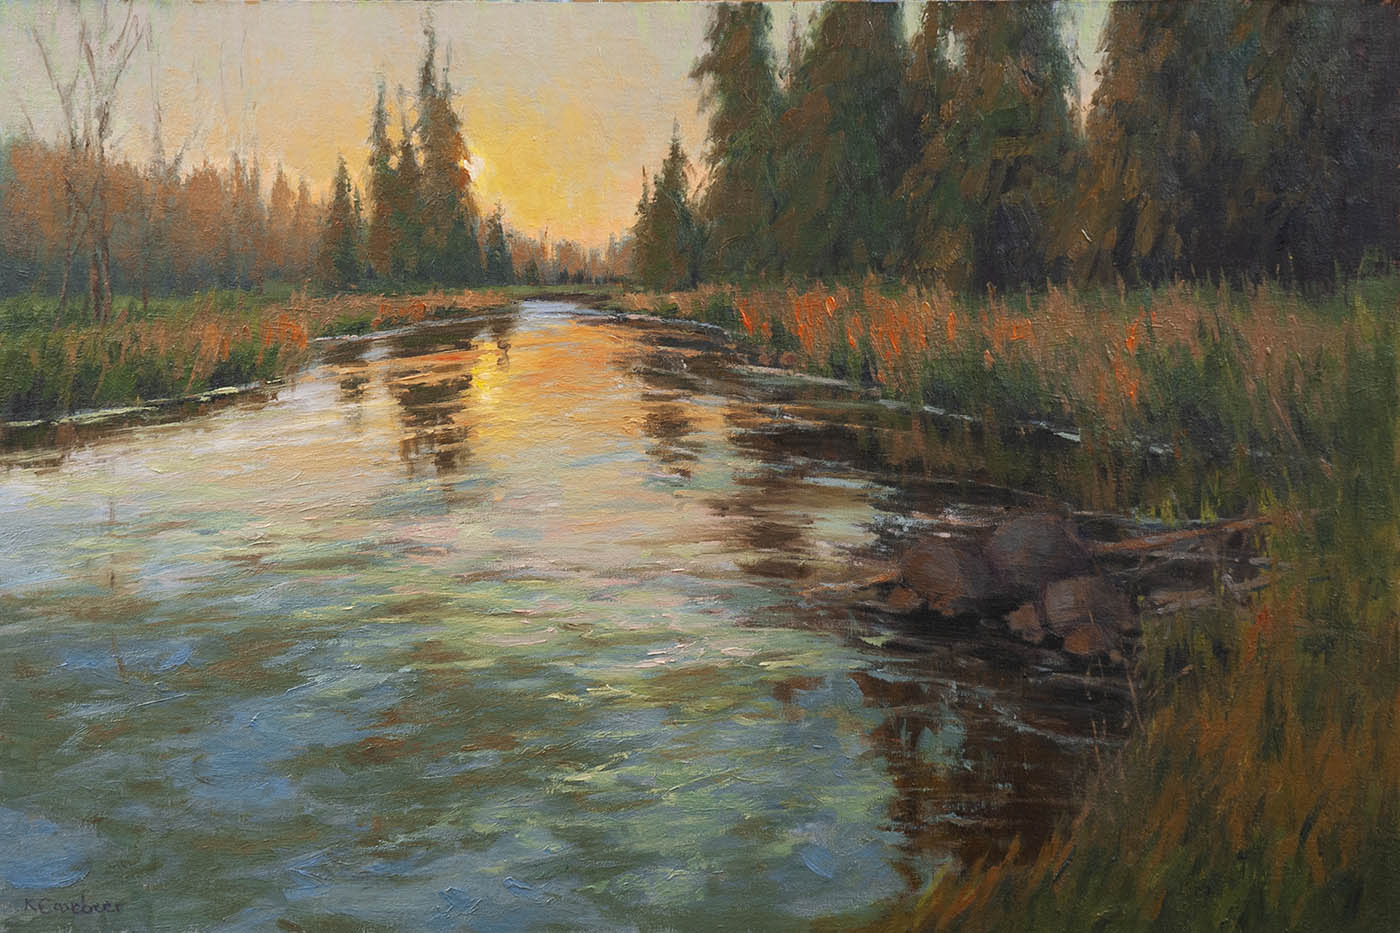 sunsetting; reflecting in water; surrounded by trees